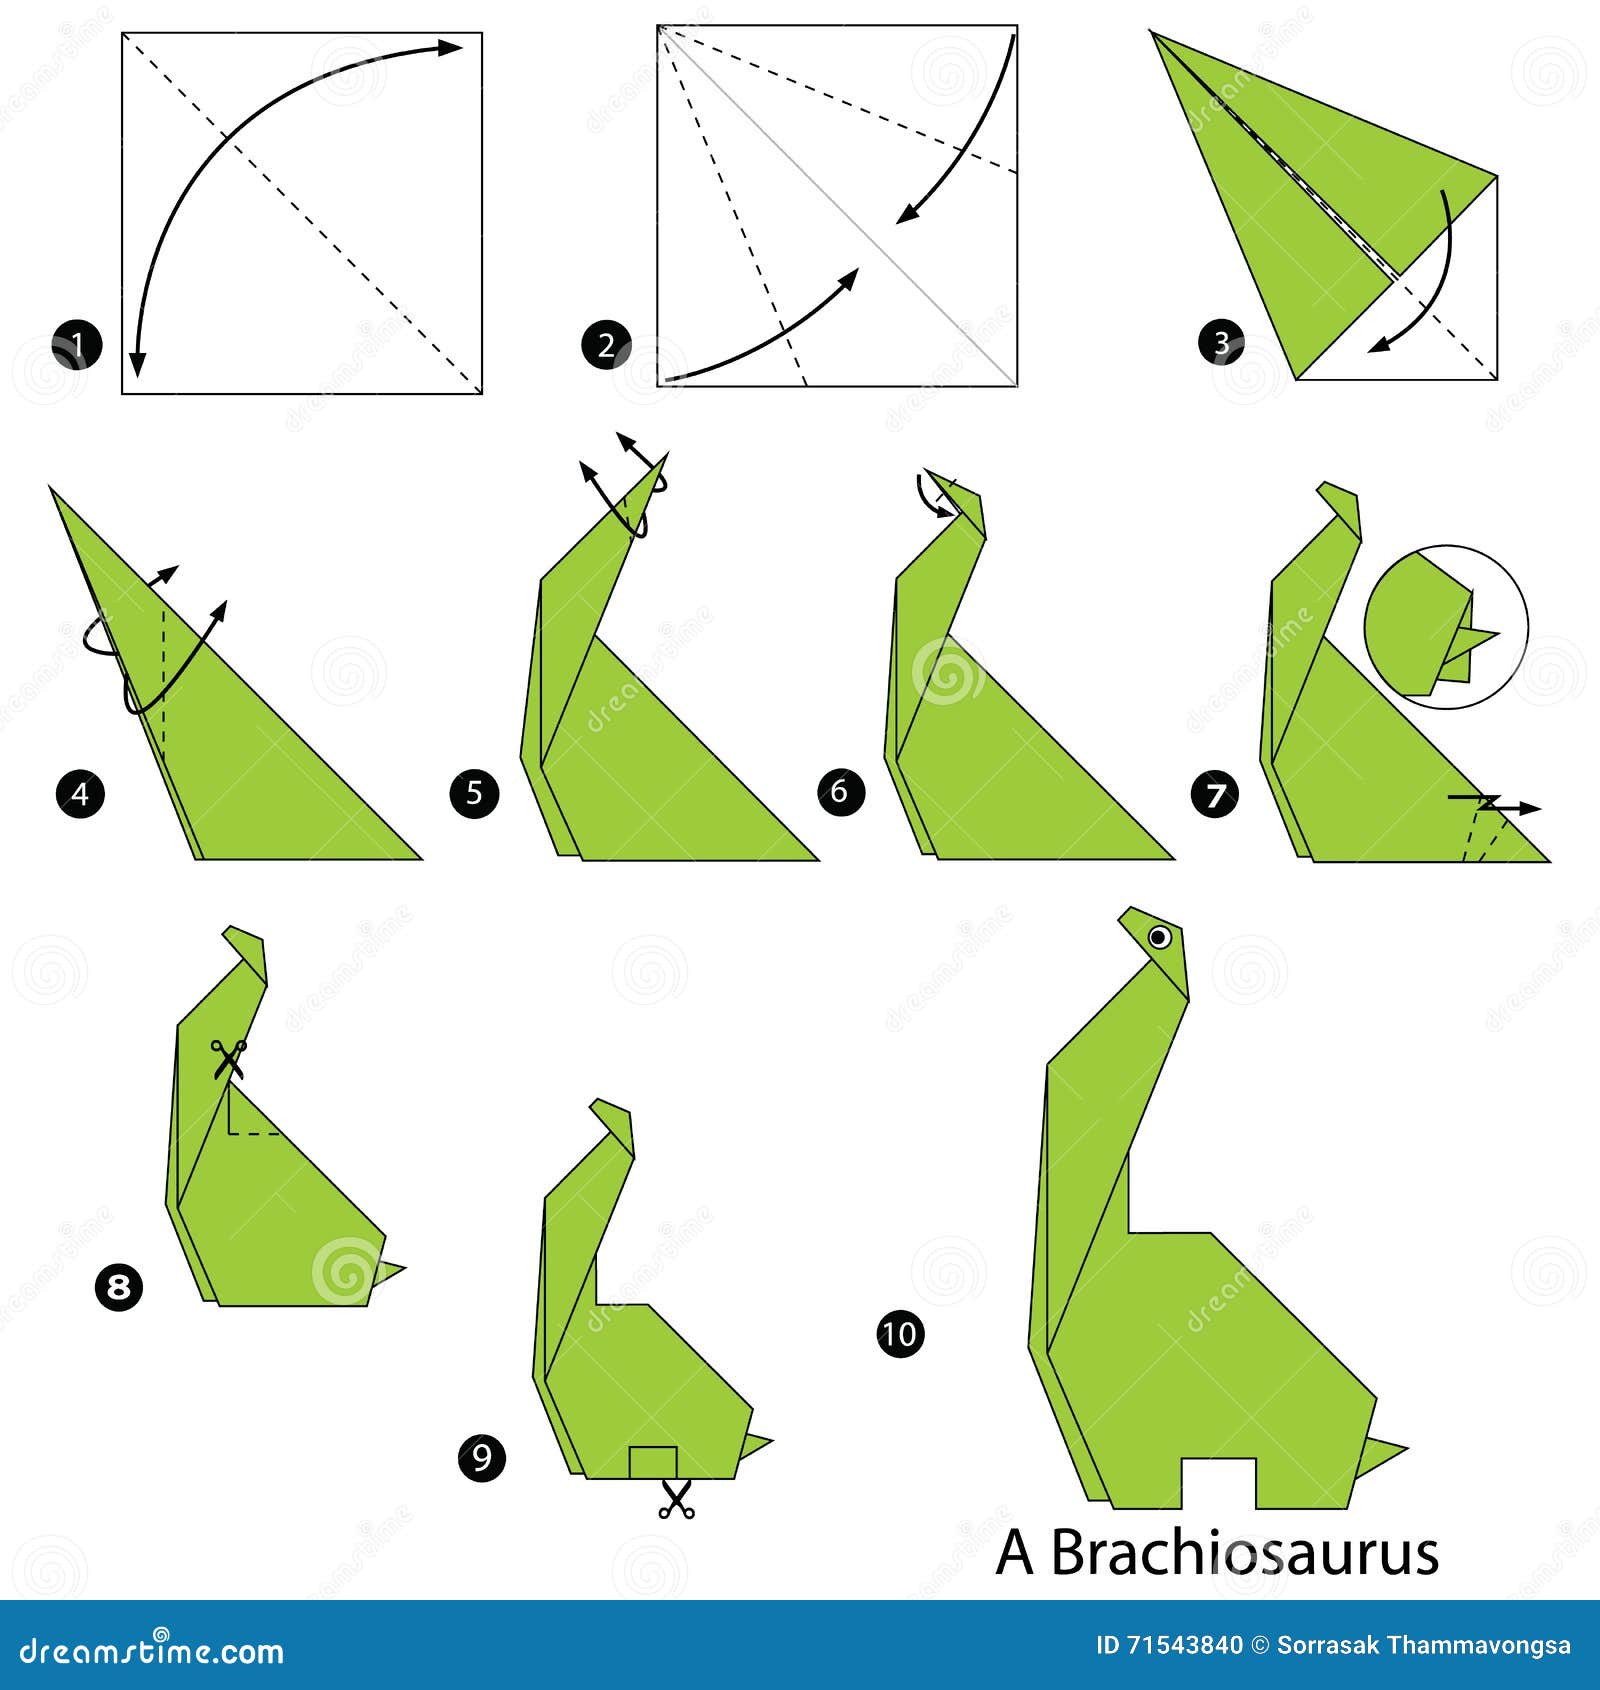 step by step instructions how to make origami a dinosaur.